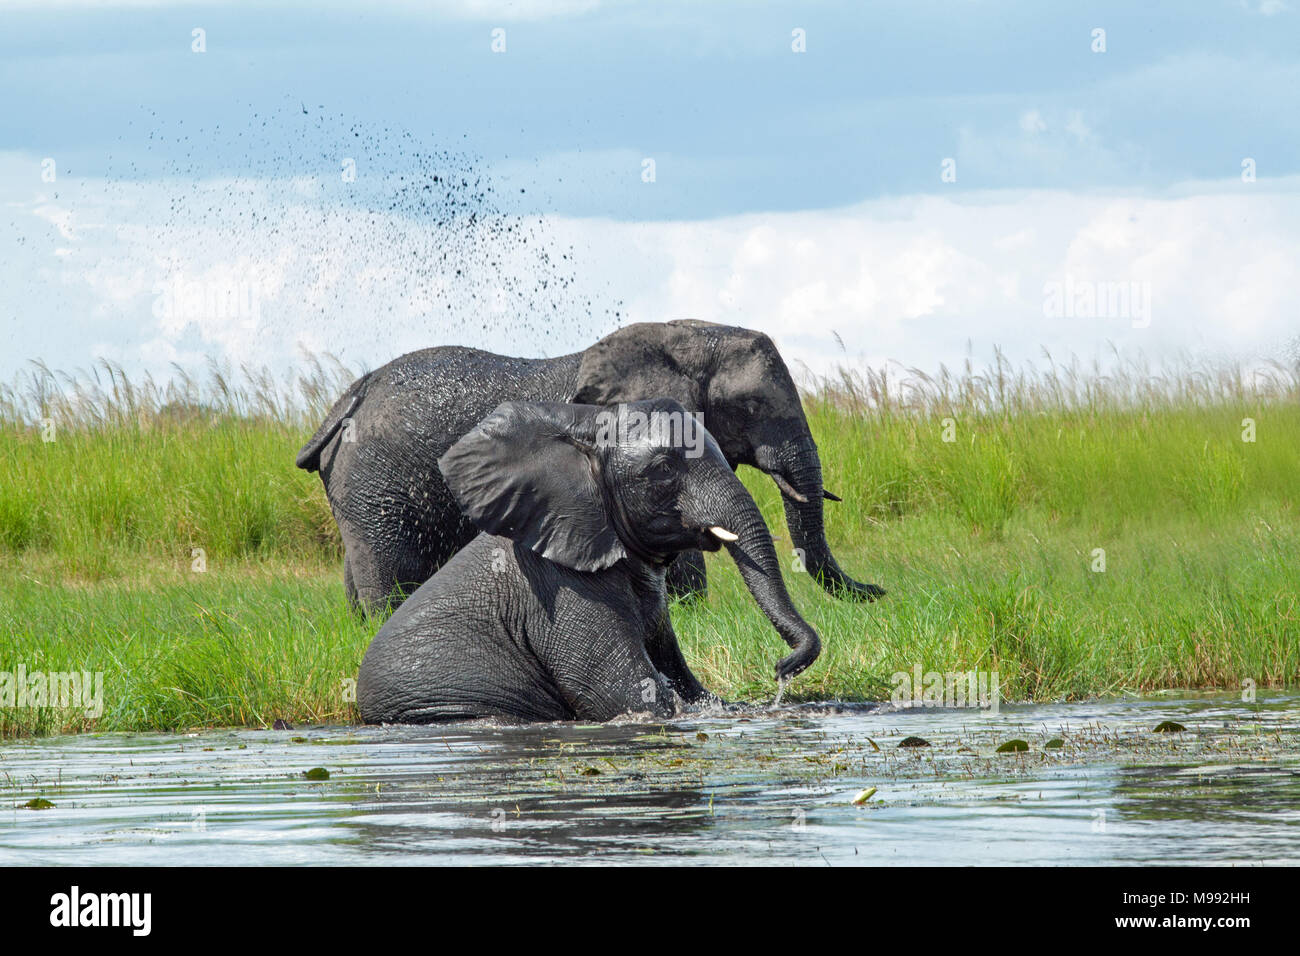 African Elephants (Loxodonta africana). Cow  in rear gathering green marginal aquatic vegetation to eat using trunk. Nearer front animal using trunk t Stock Photo